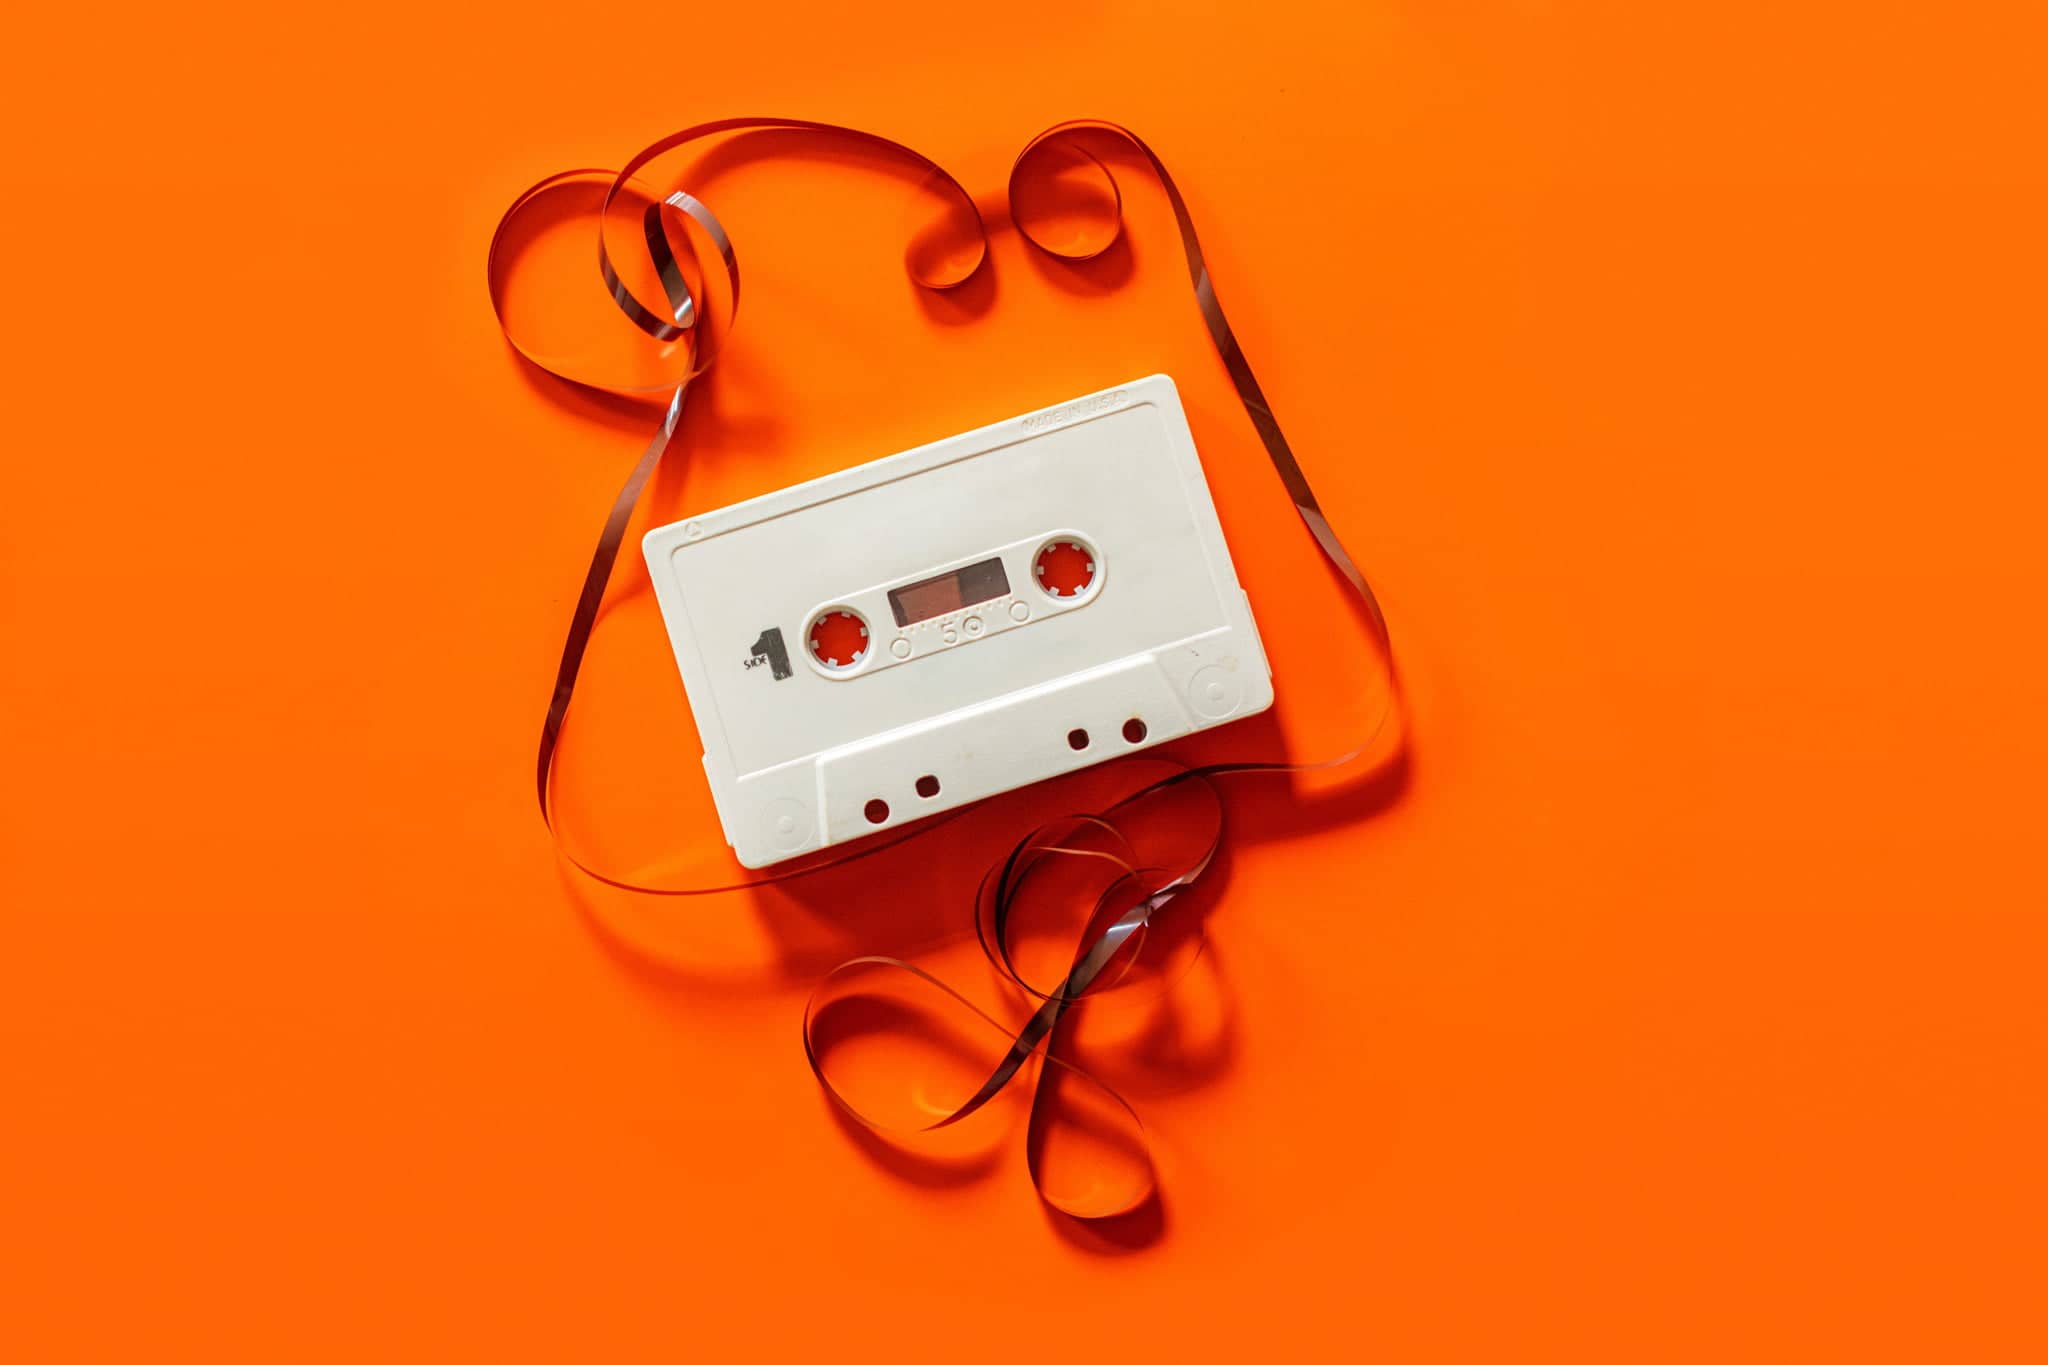 cassette tape being duplicated on orange background